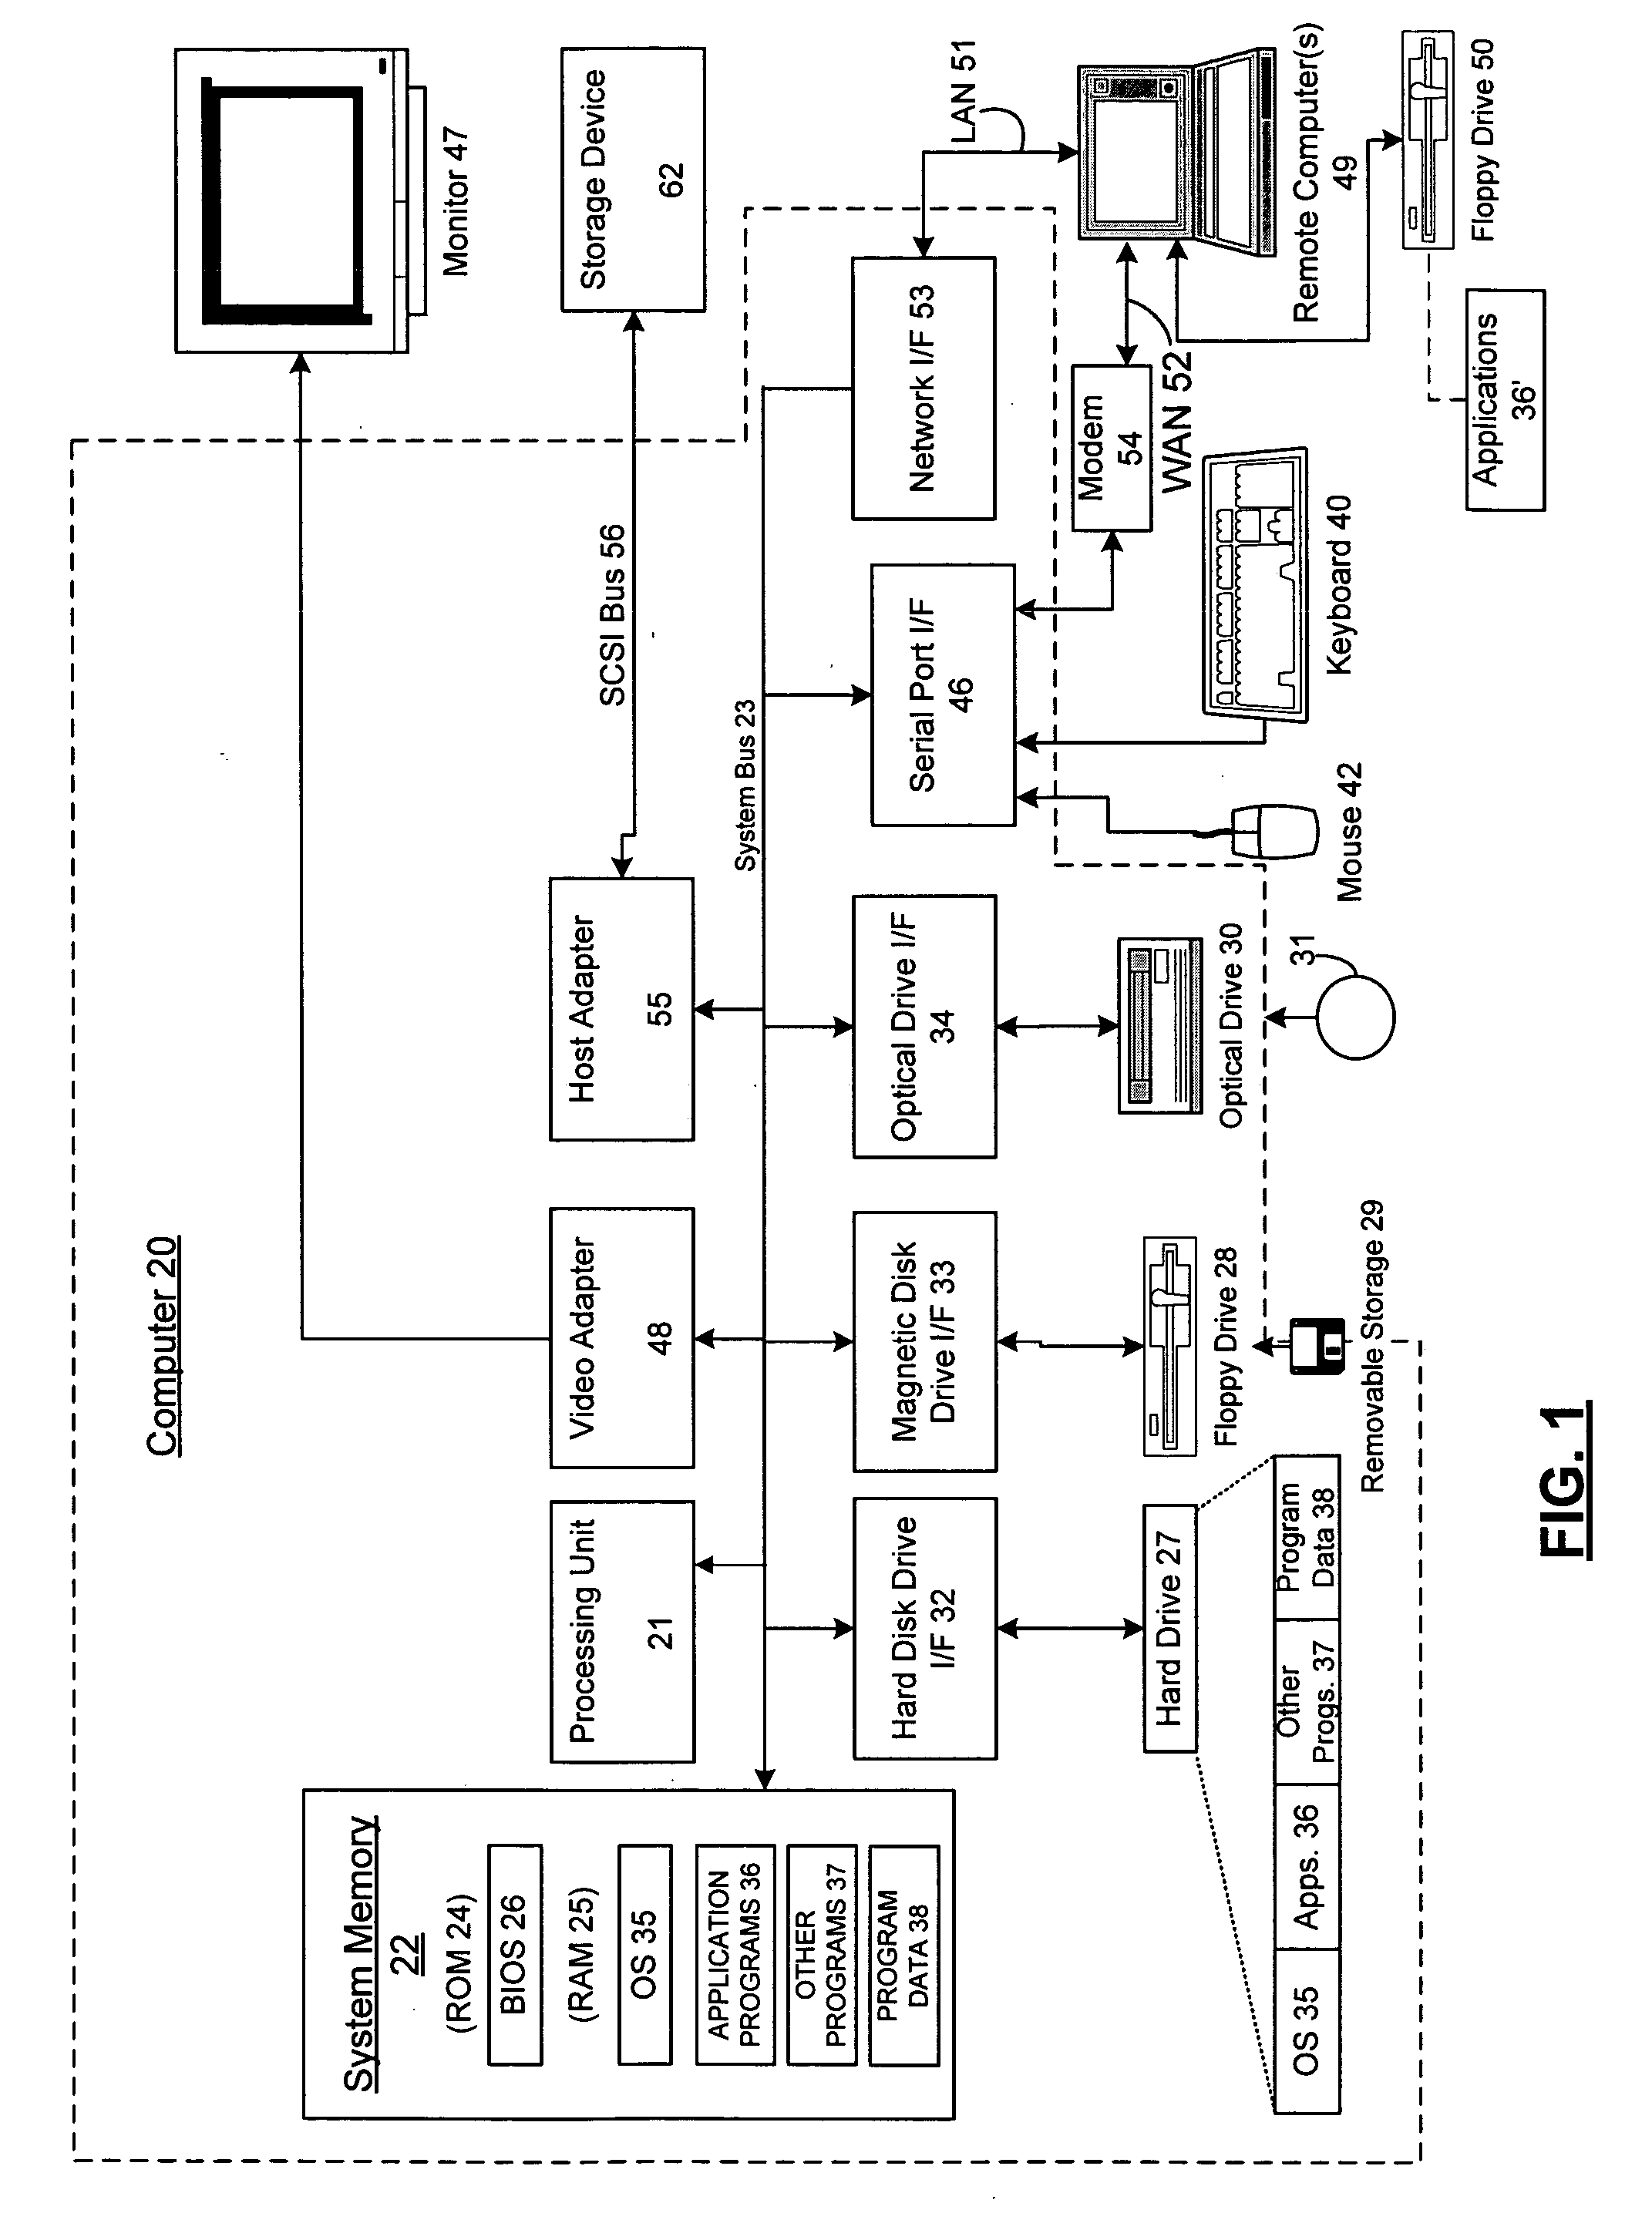 Systems and methods for providing conflict handling for peer-to-peer synchronization of units of information manageable by a hardware/software interface system